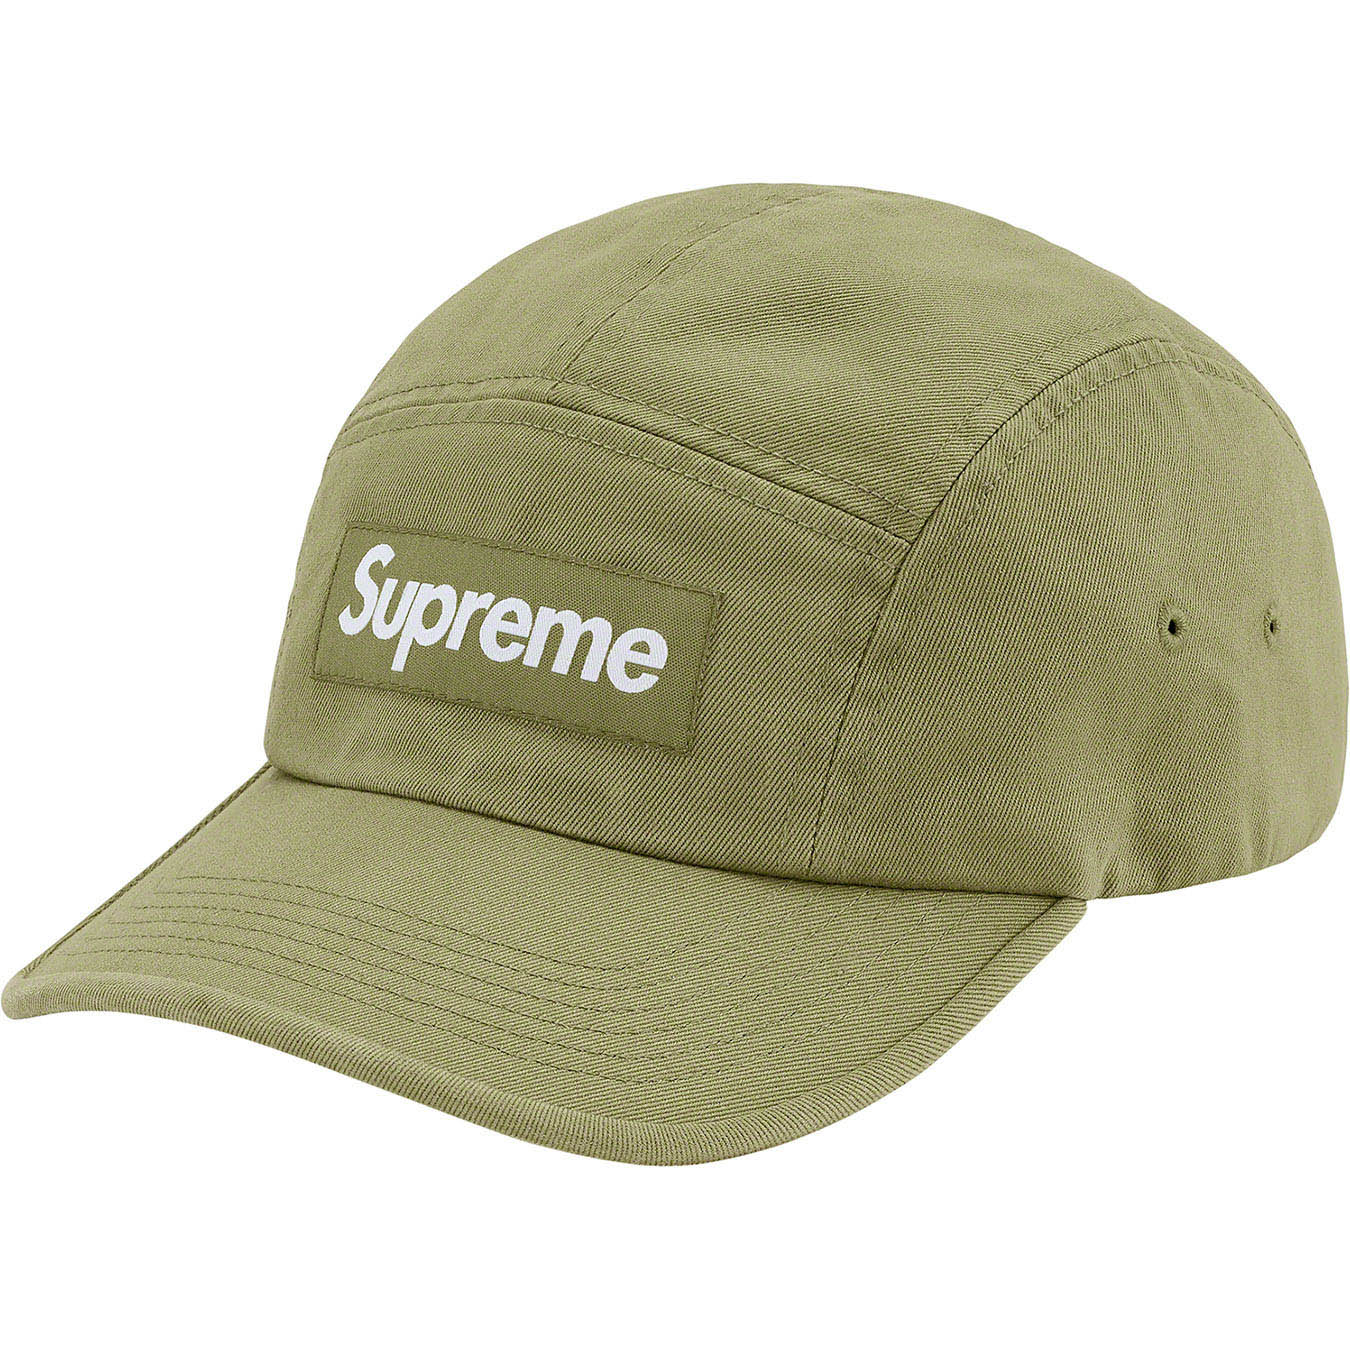 Washed Chino Twill Camp Cap | Supreme 21ss